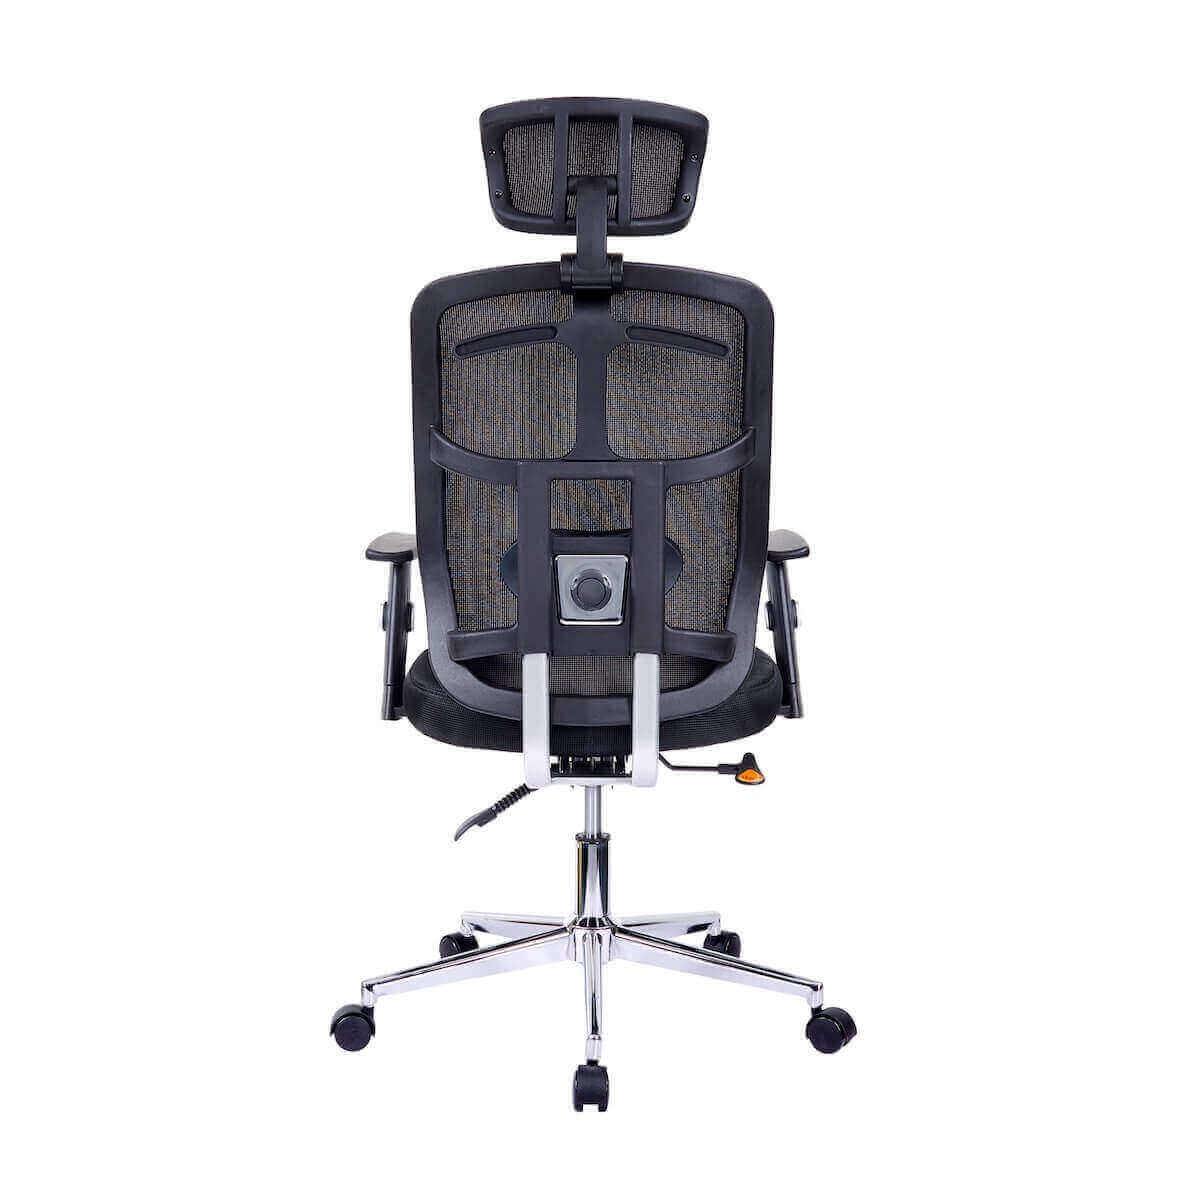 Techni Mobili Black High Back Executive Mesh Office Chair with Arms, Lumbar Support, and Chrome Base RTA-1010-BK Back